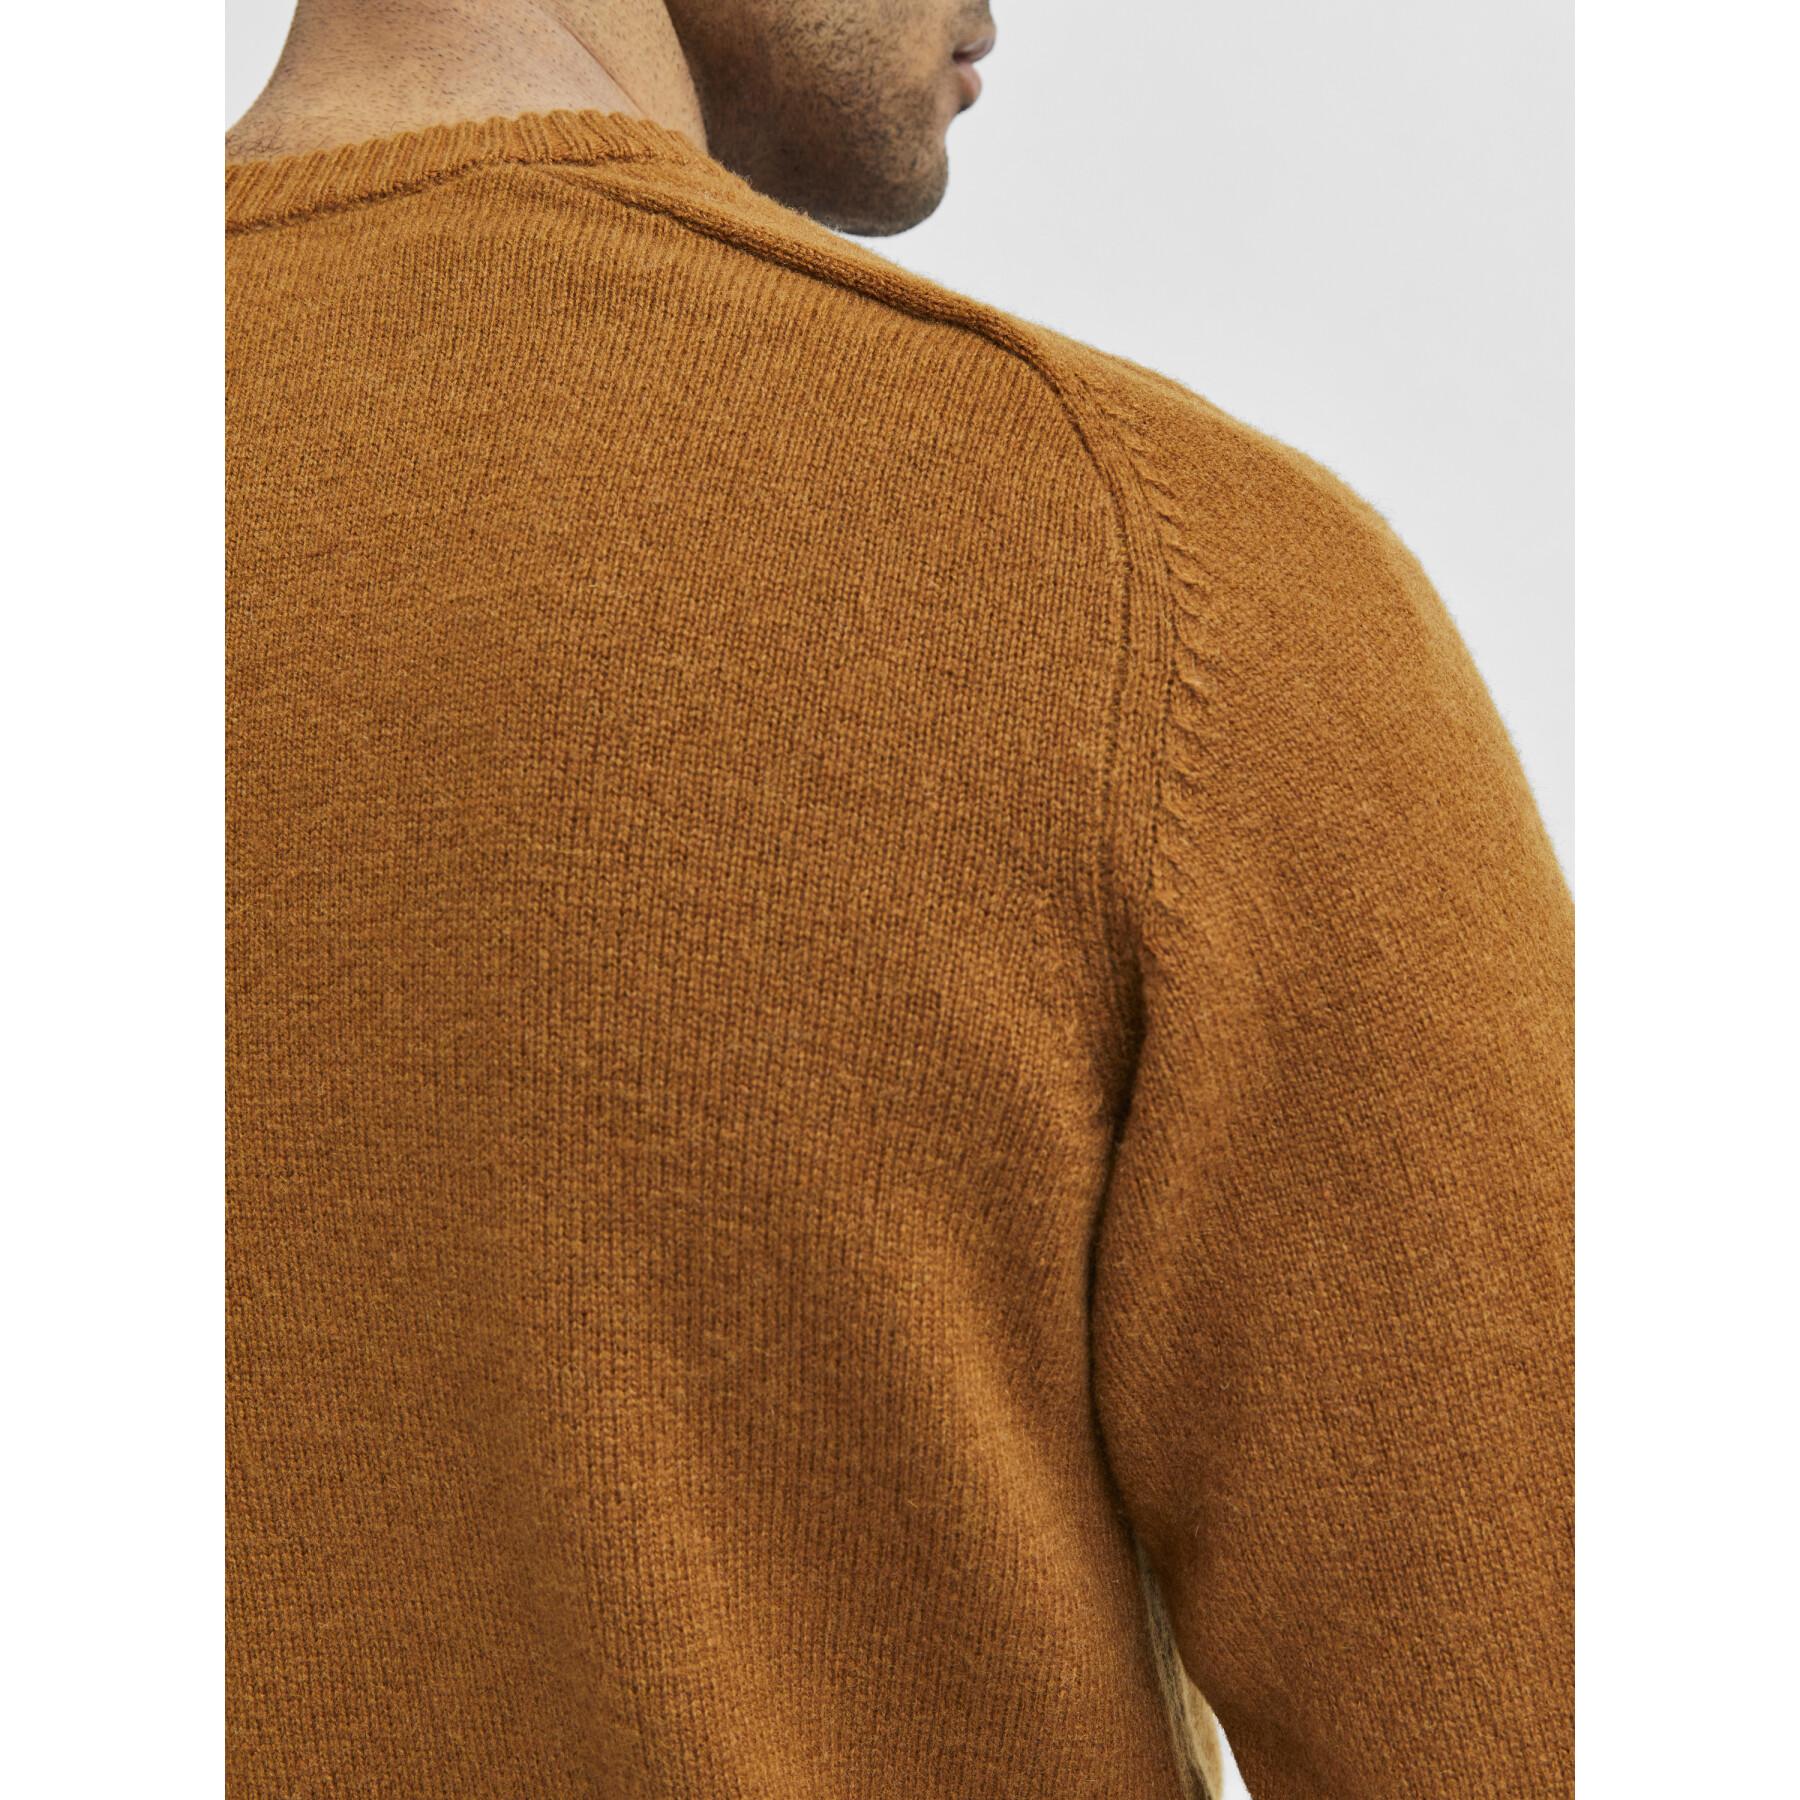 Sweater Selected Newcoban lambs wool col rond